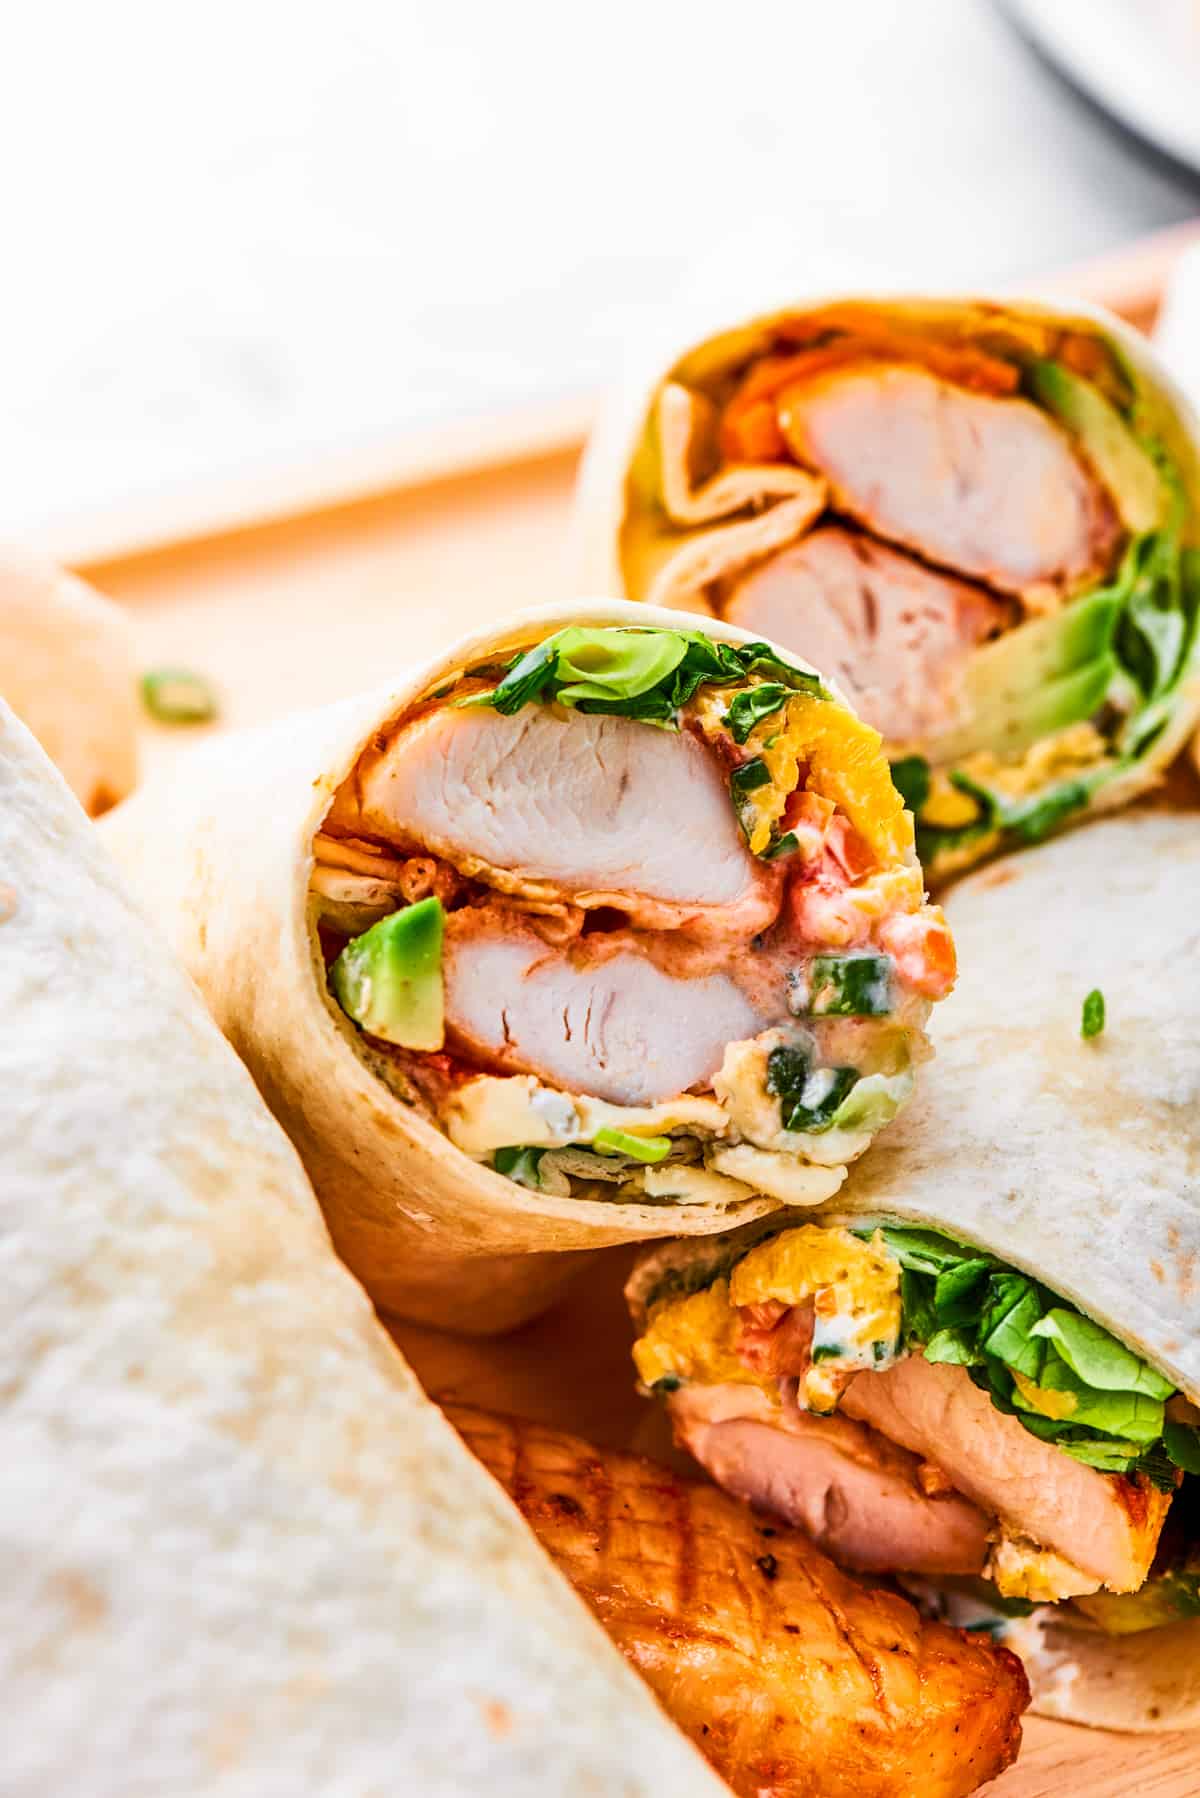 A halved buffalo chicken wrap shows the interior of chicken and vegetables.